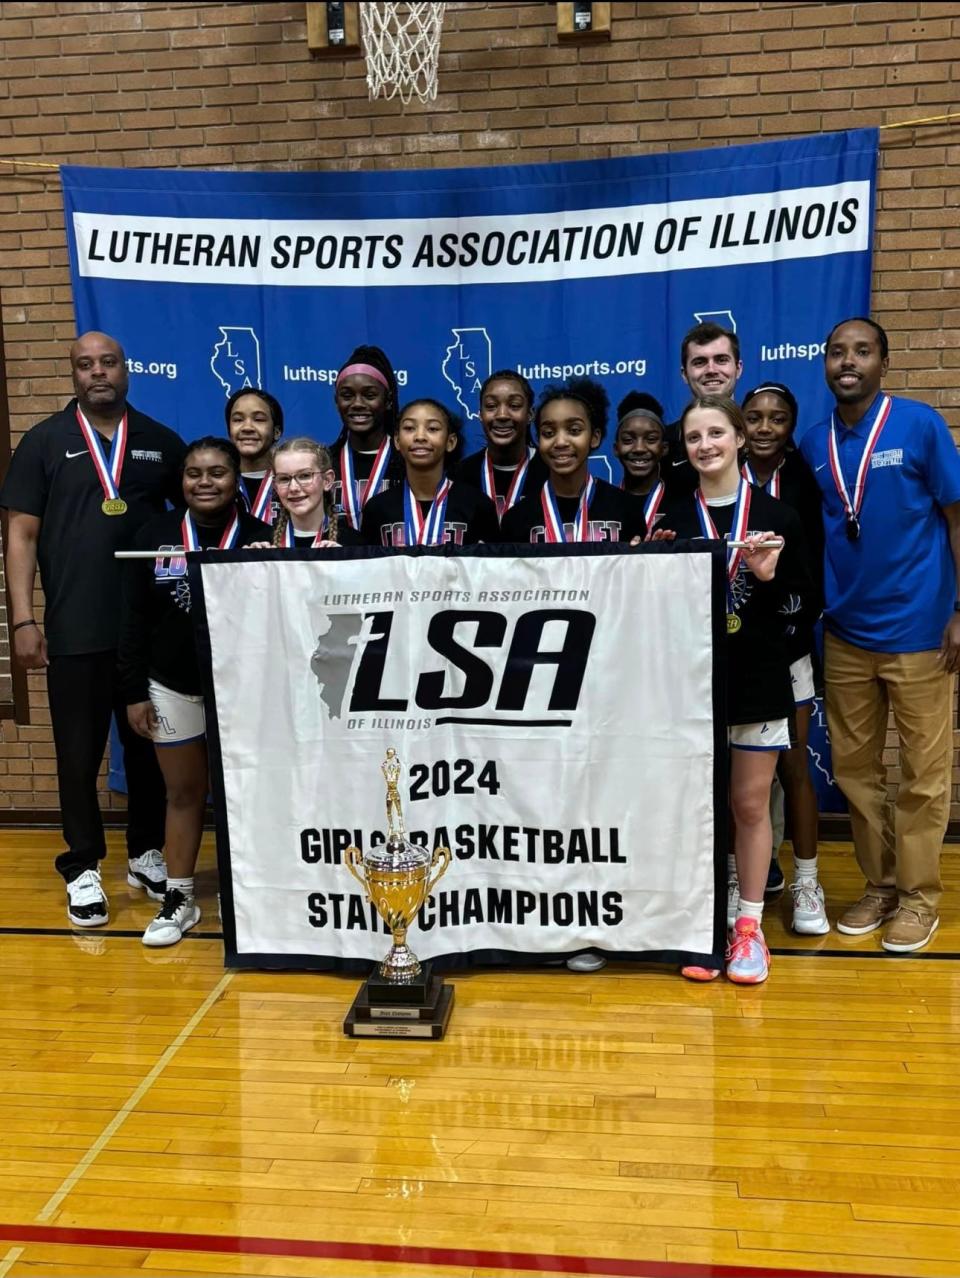 Christ Lutheran won the 2024 Lutheran Sports Association of Illinois girls state basketball championship earlier this month. Former Manual standout Paris Gulley, far right, is the head coach.